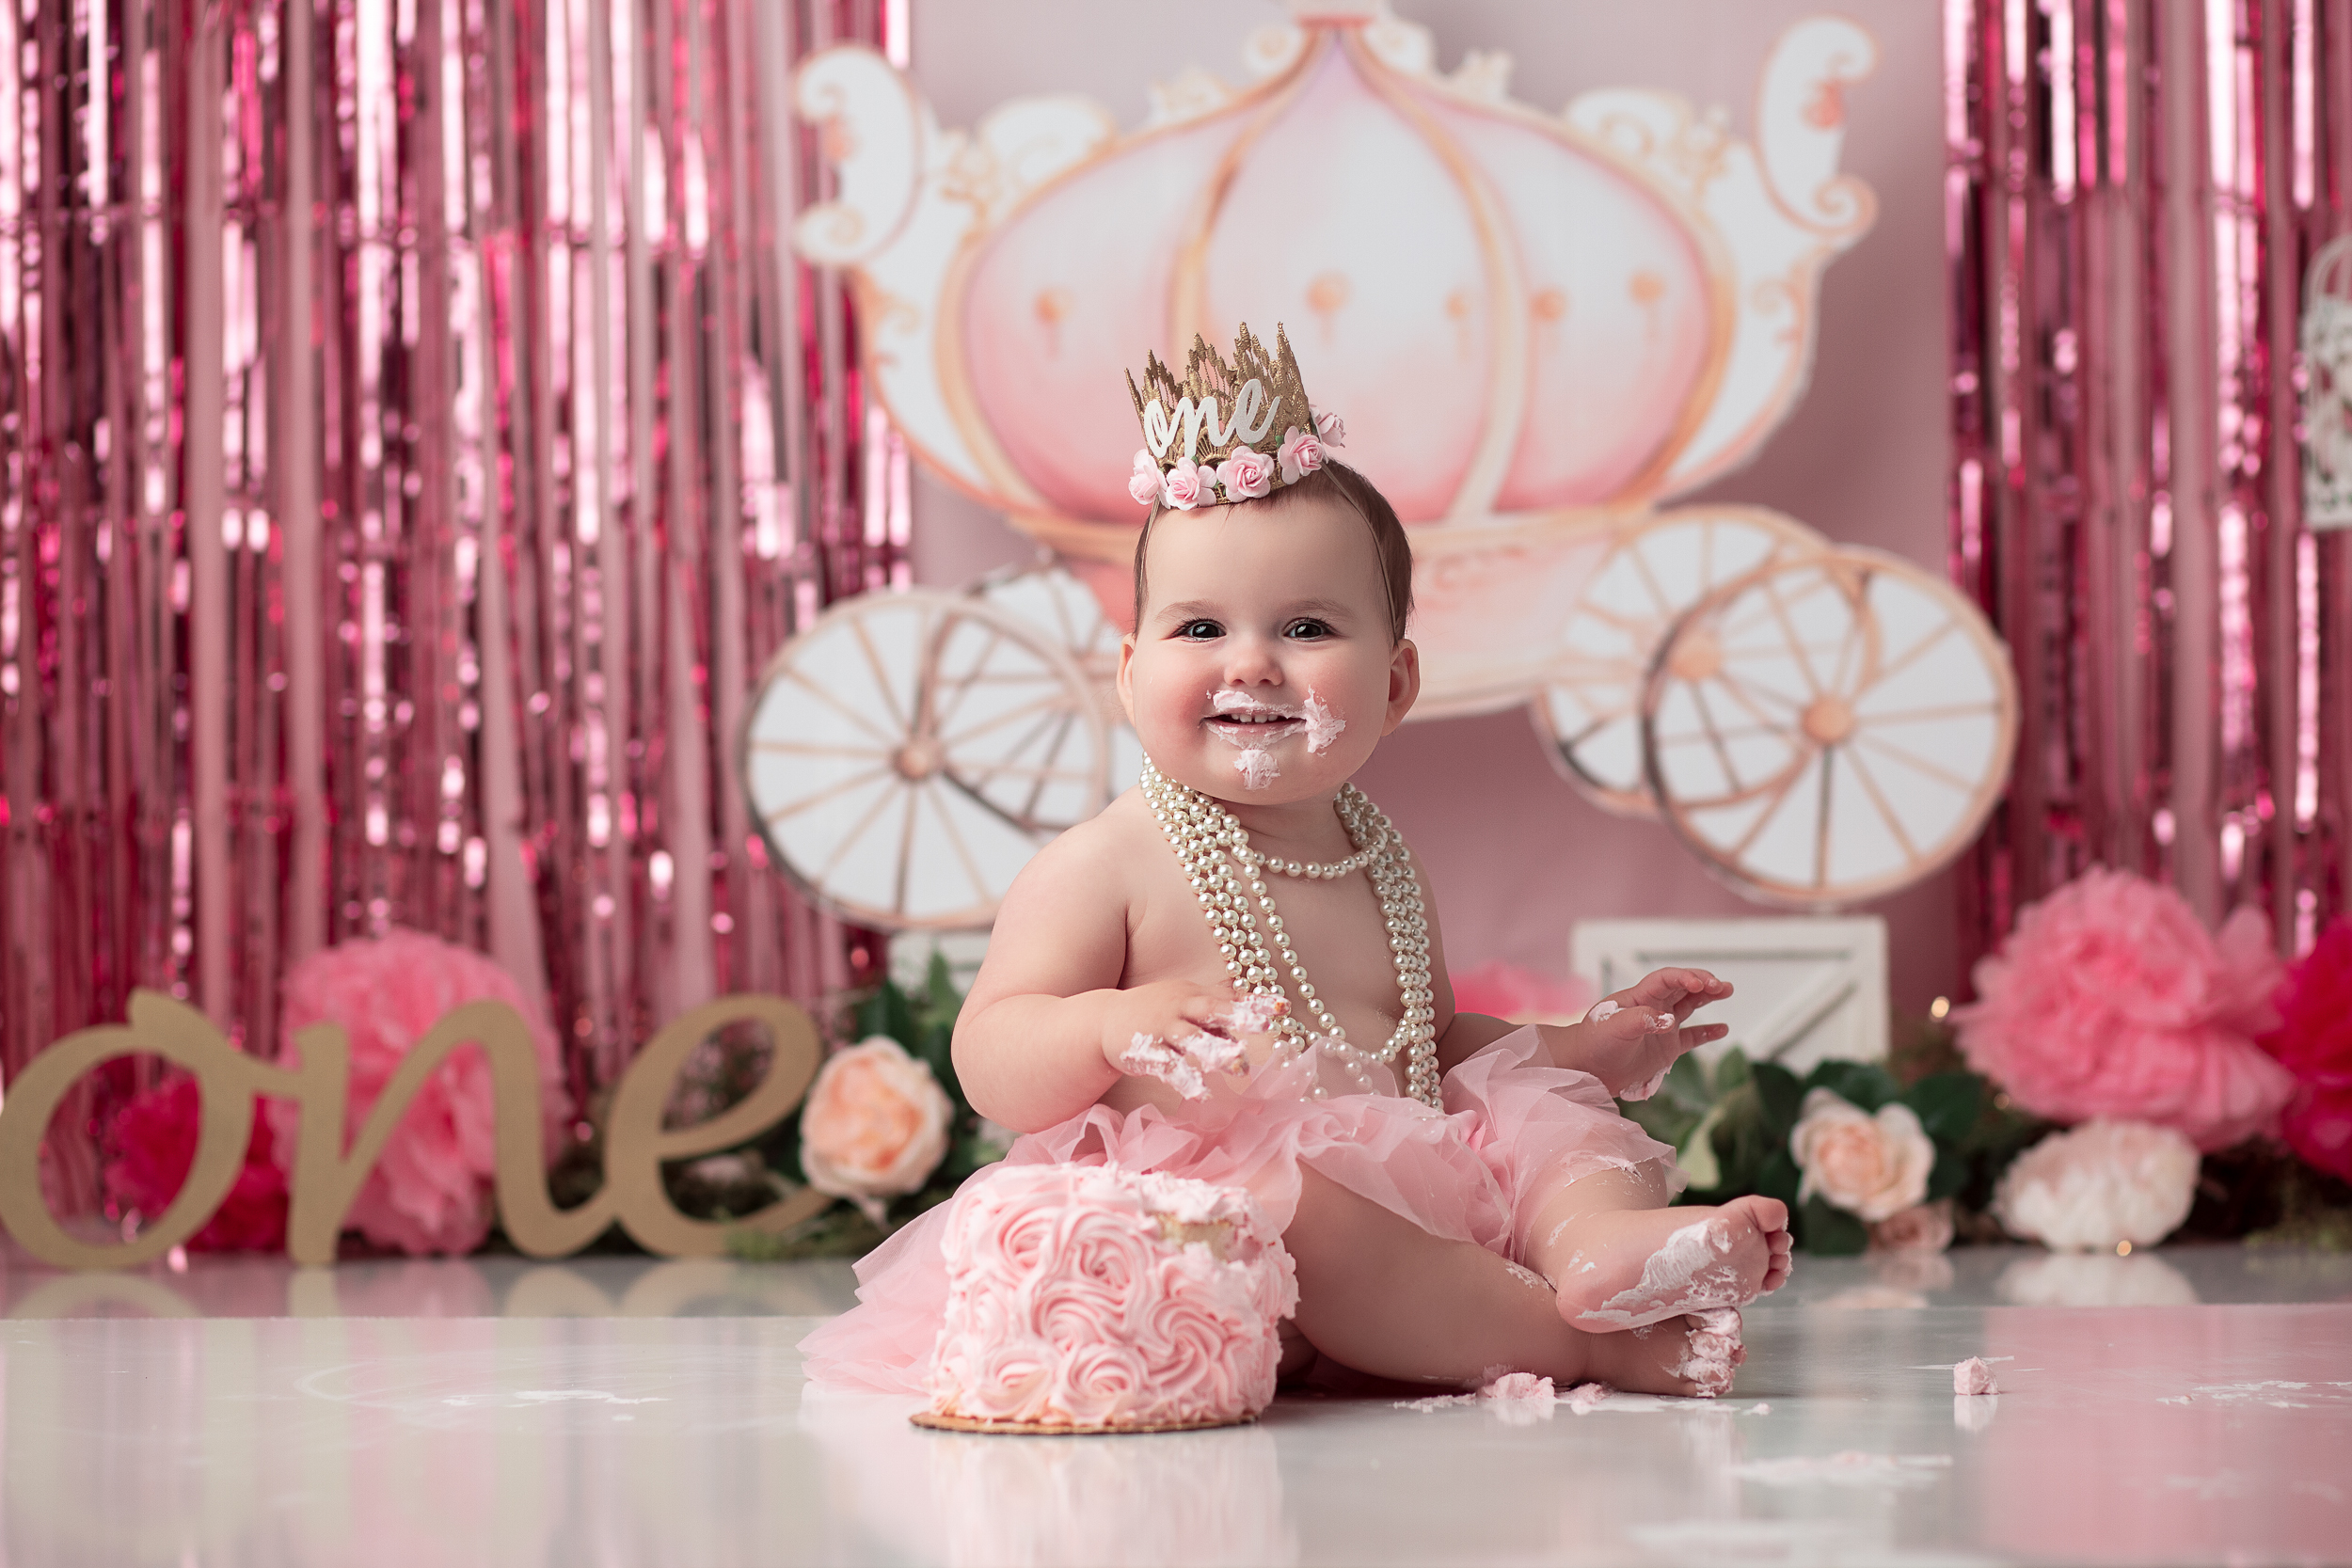 Baby Girl with a Crown and pink tutu with a cake in front of her. The backdrop is a carriage and pinks